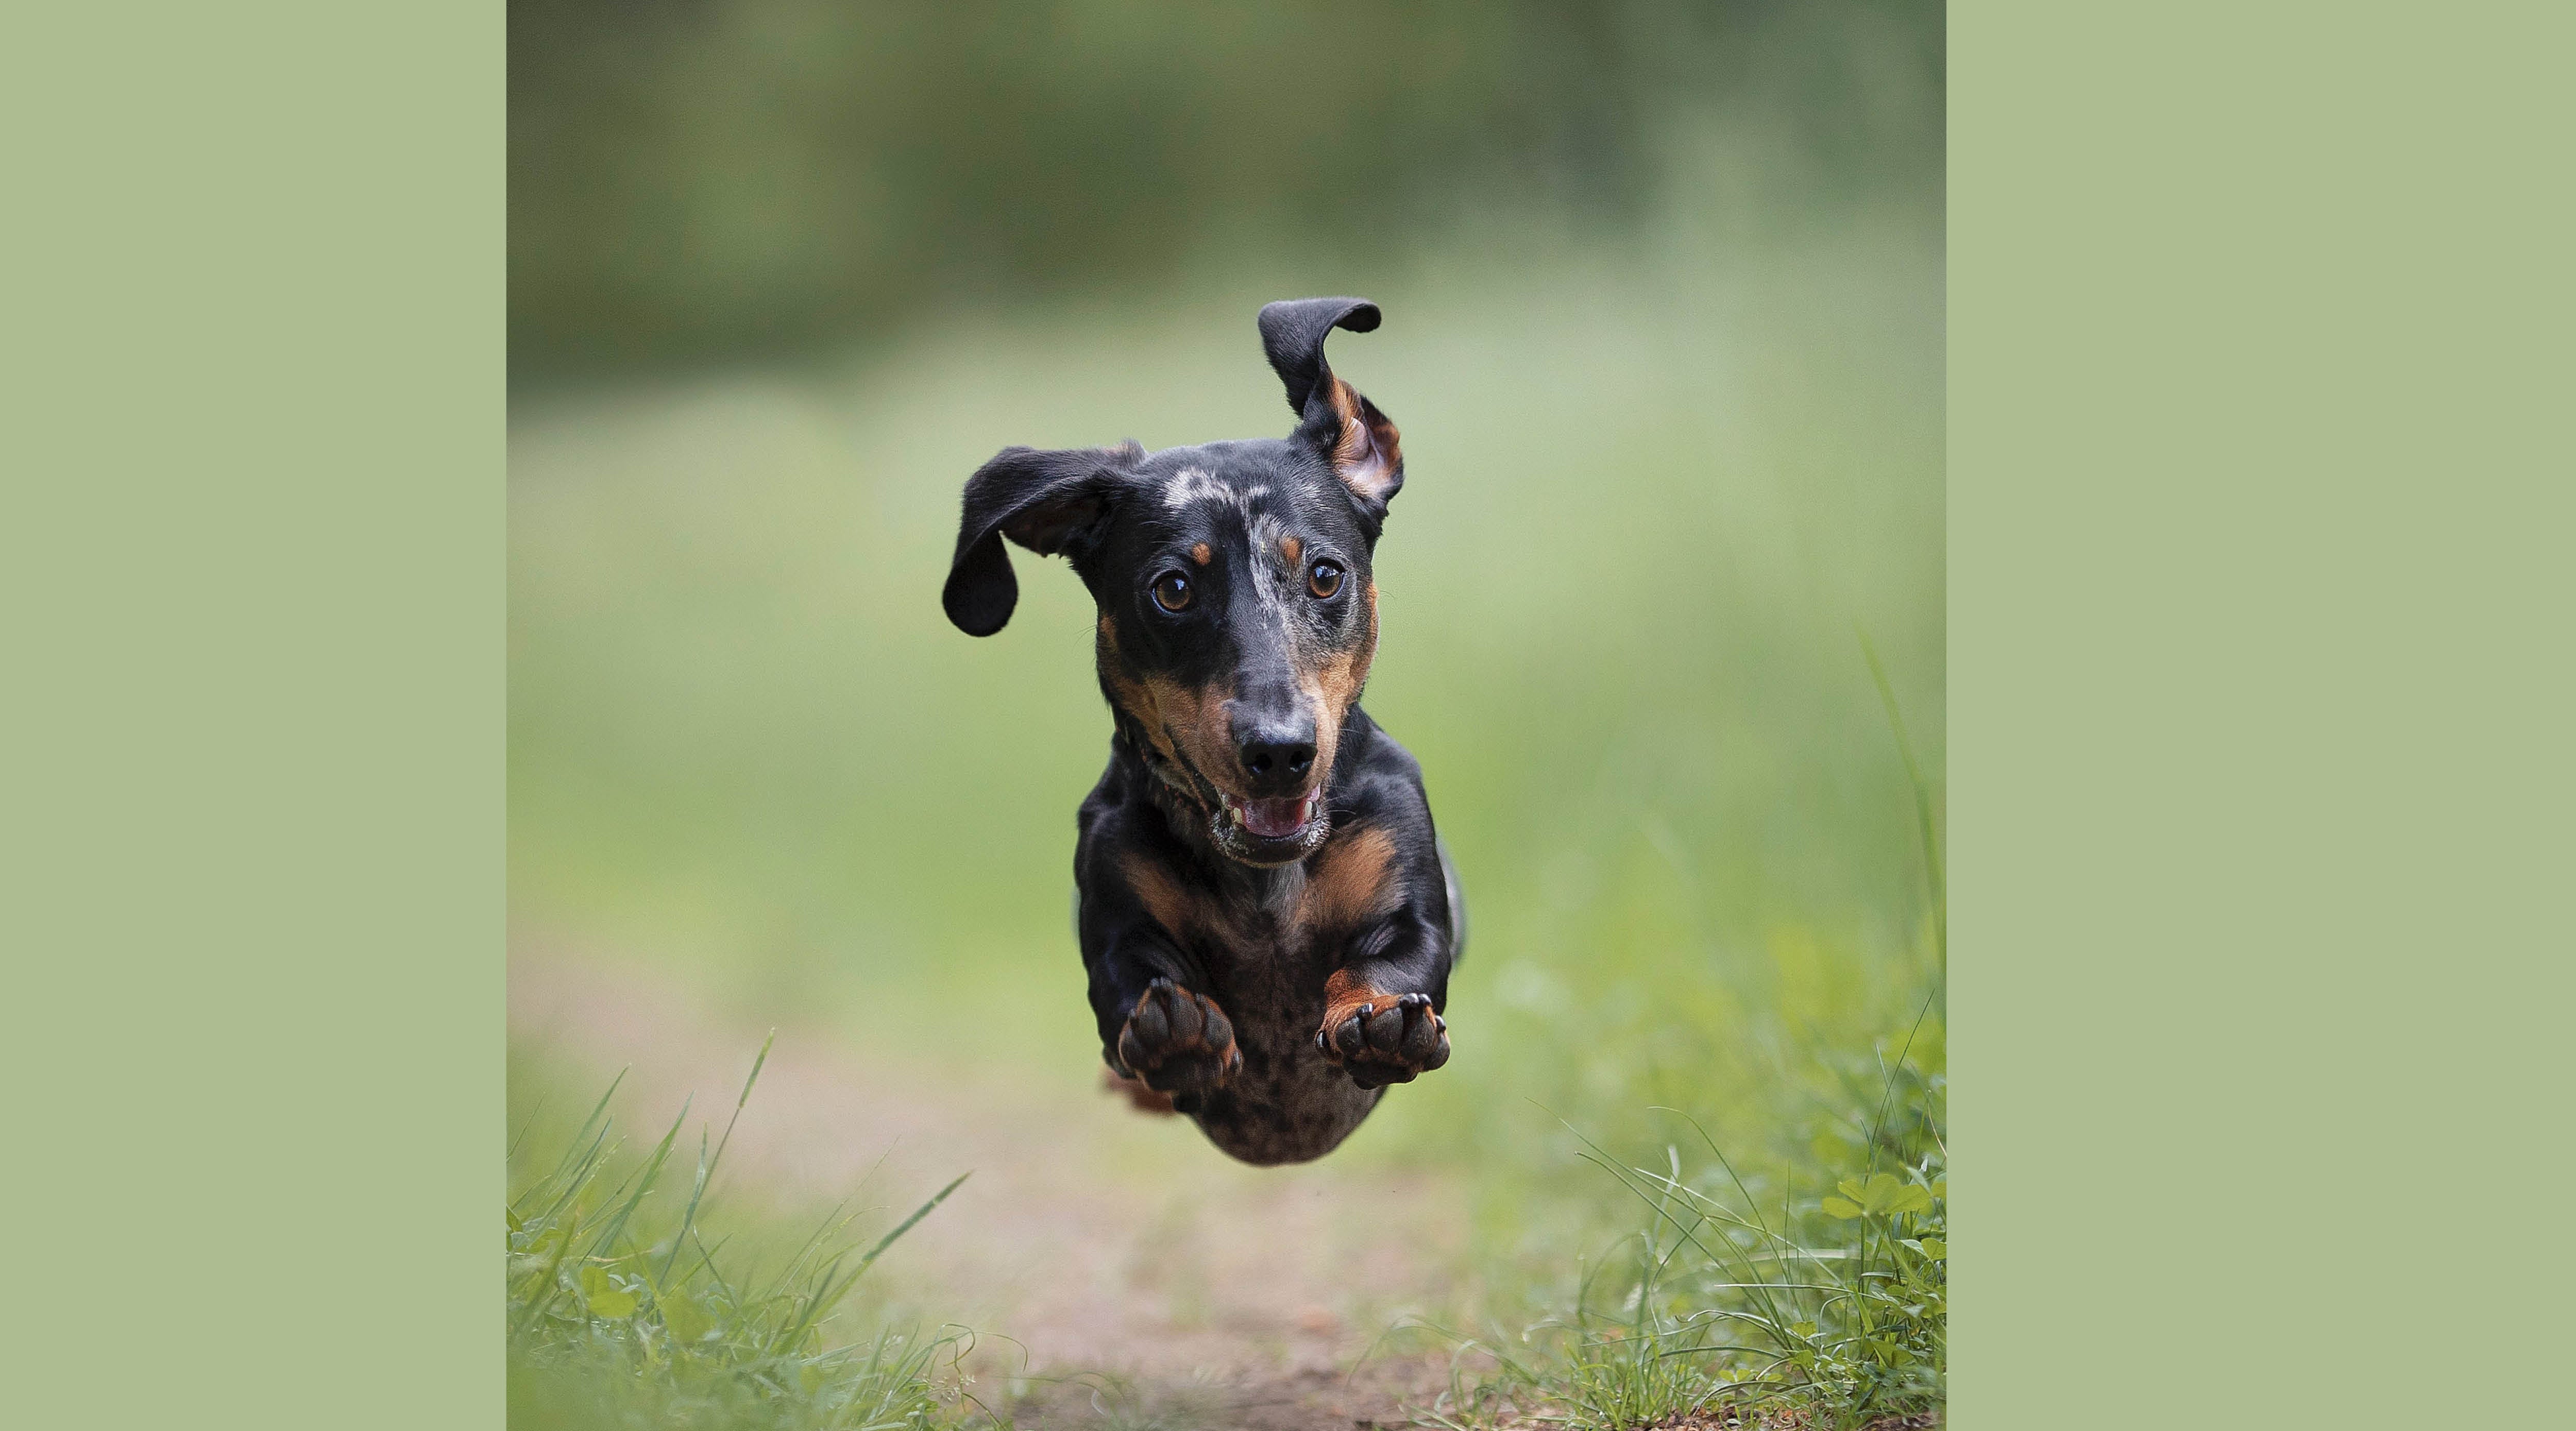 10 Reasons to use the L'il Back Bracer to Give your Dachshund relief from ivdd or dog back pain